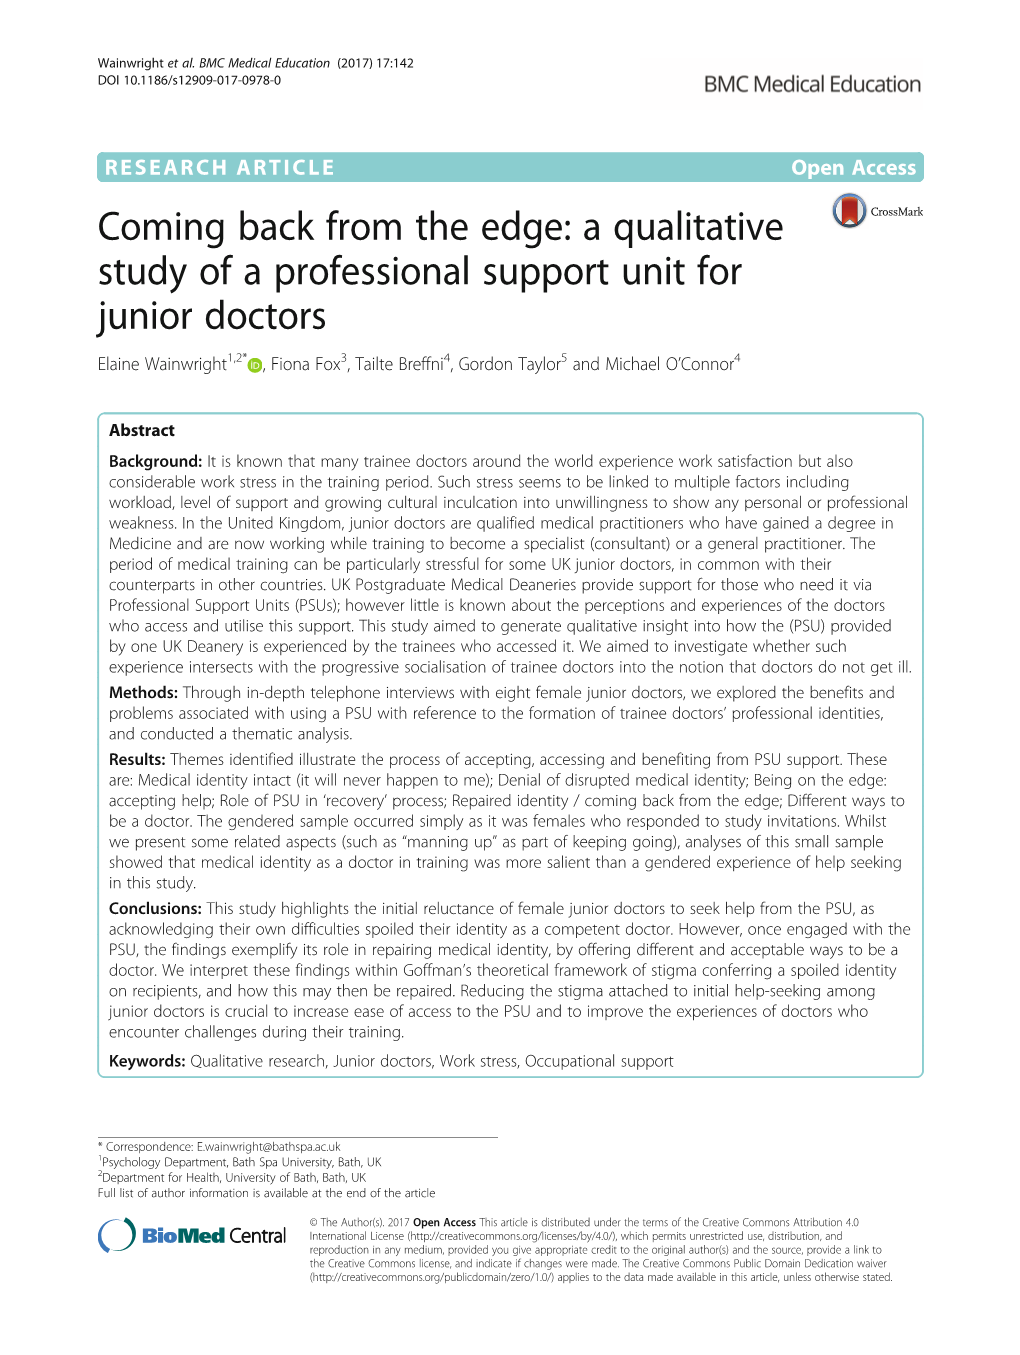 Coming Back from the Edge: a Qualitative Study of a Professional